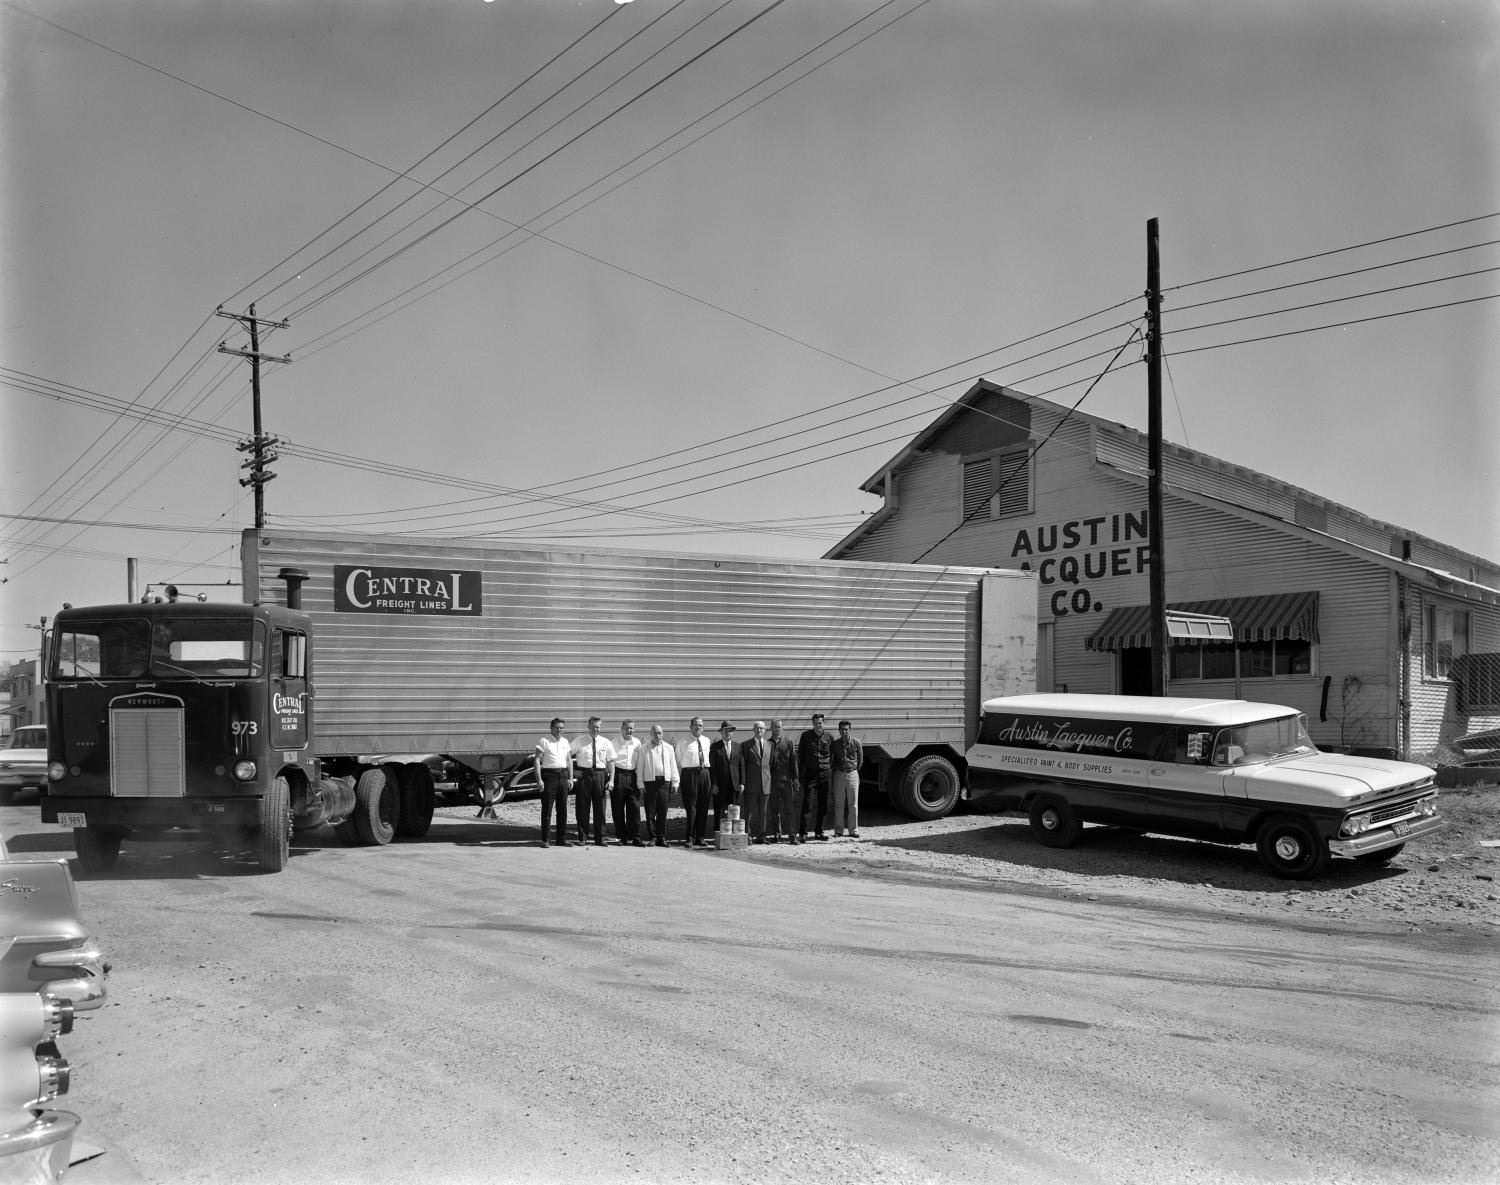 Truck at Austin Lacquer Company, 1963